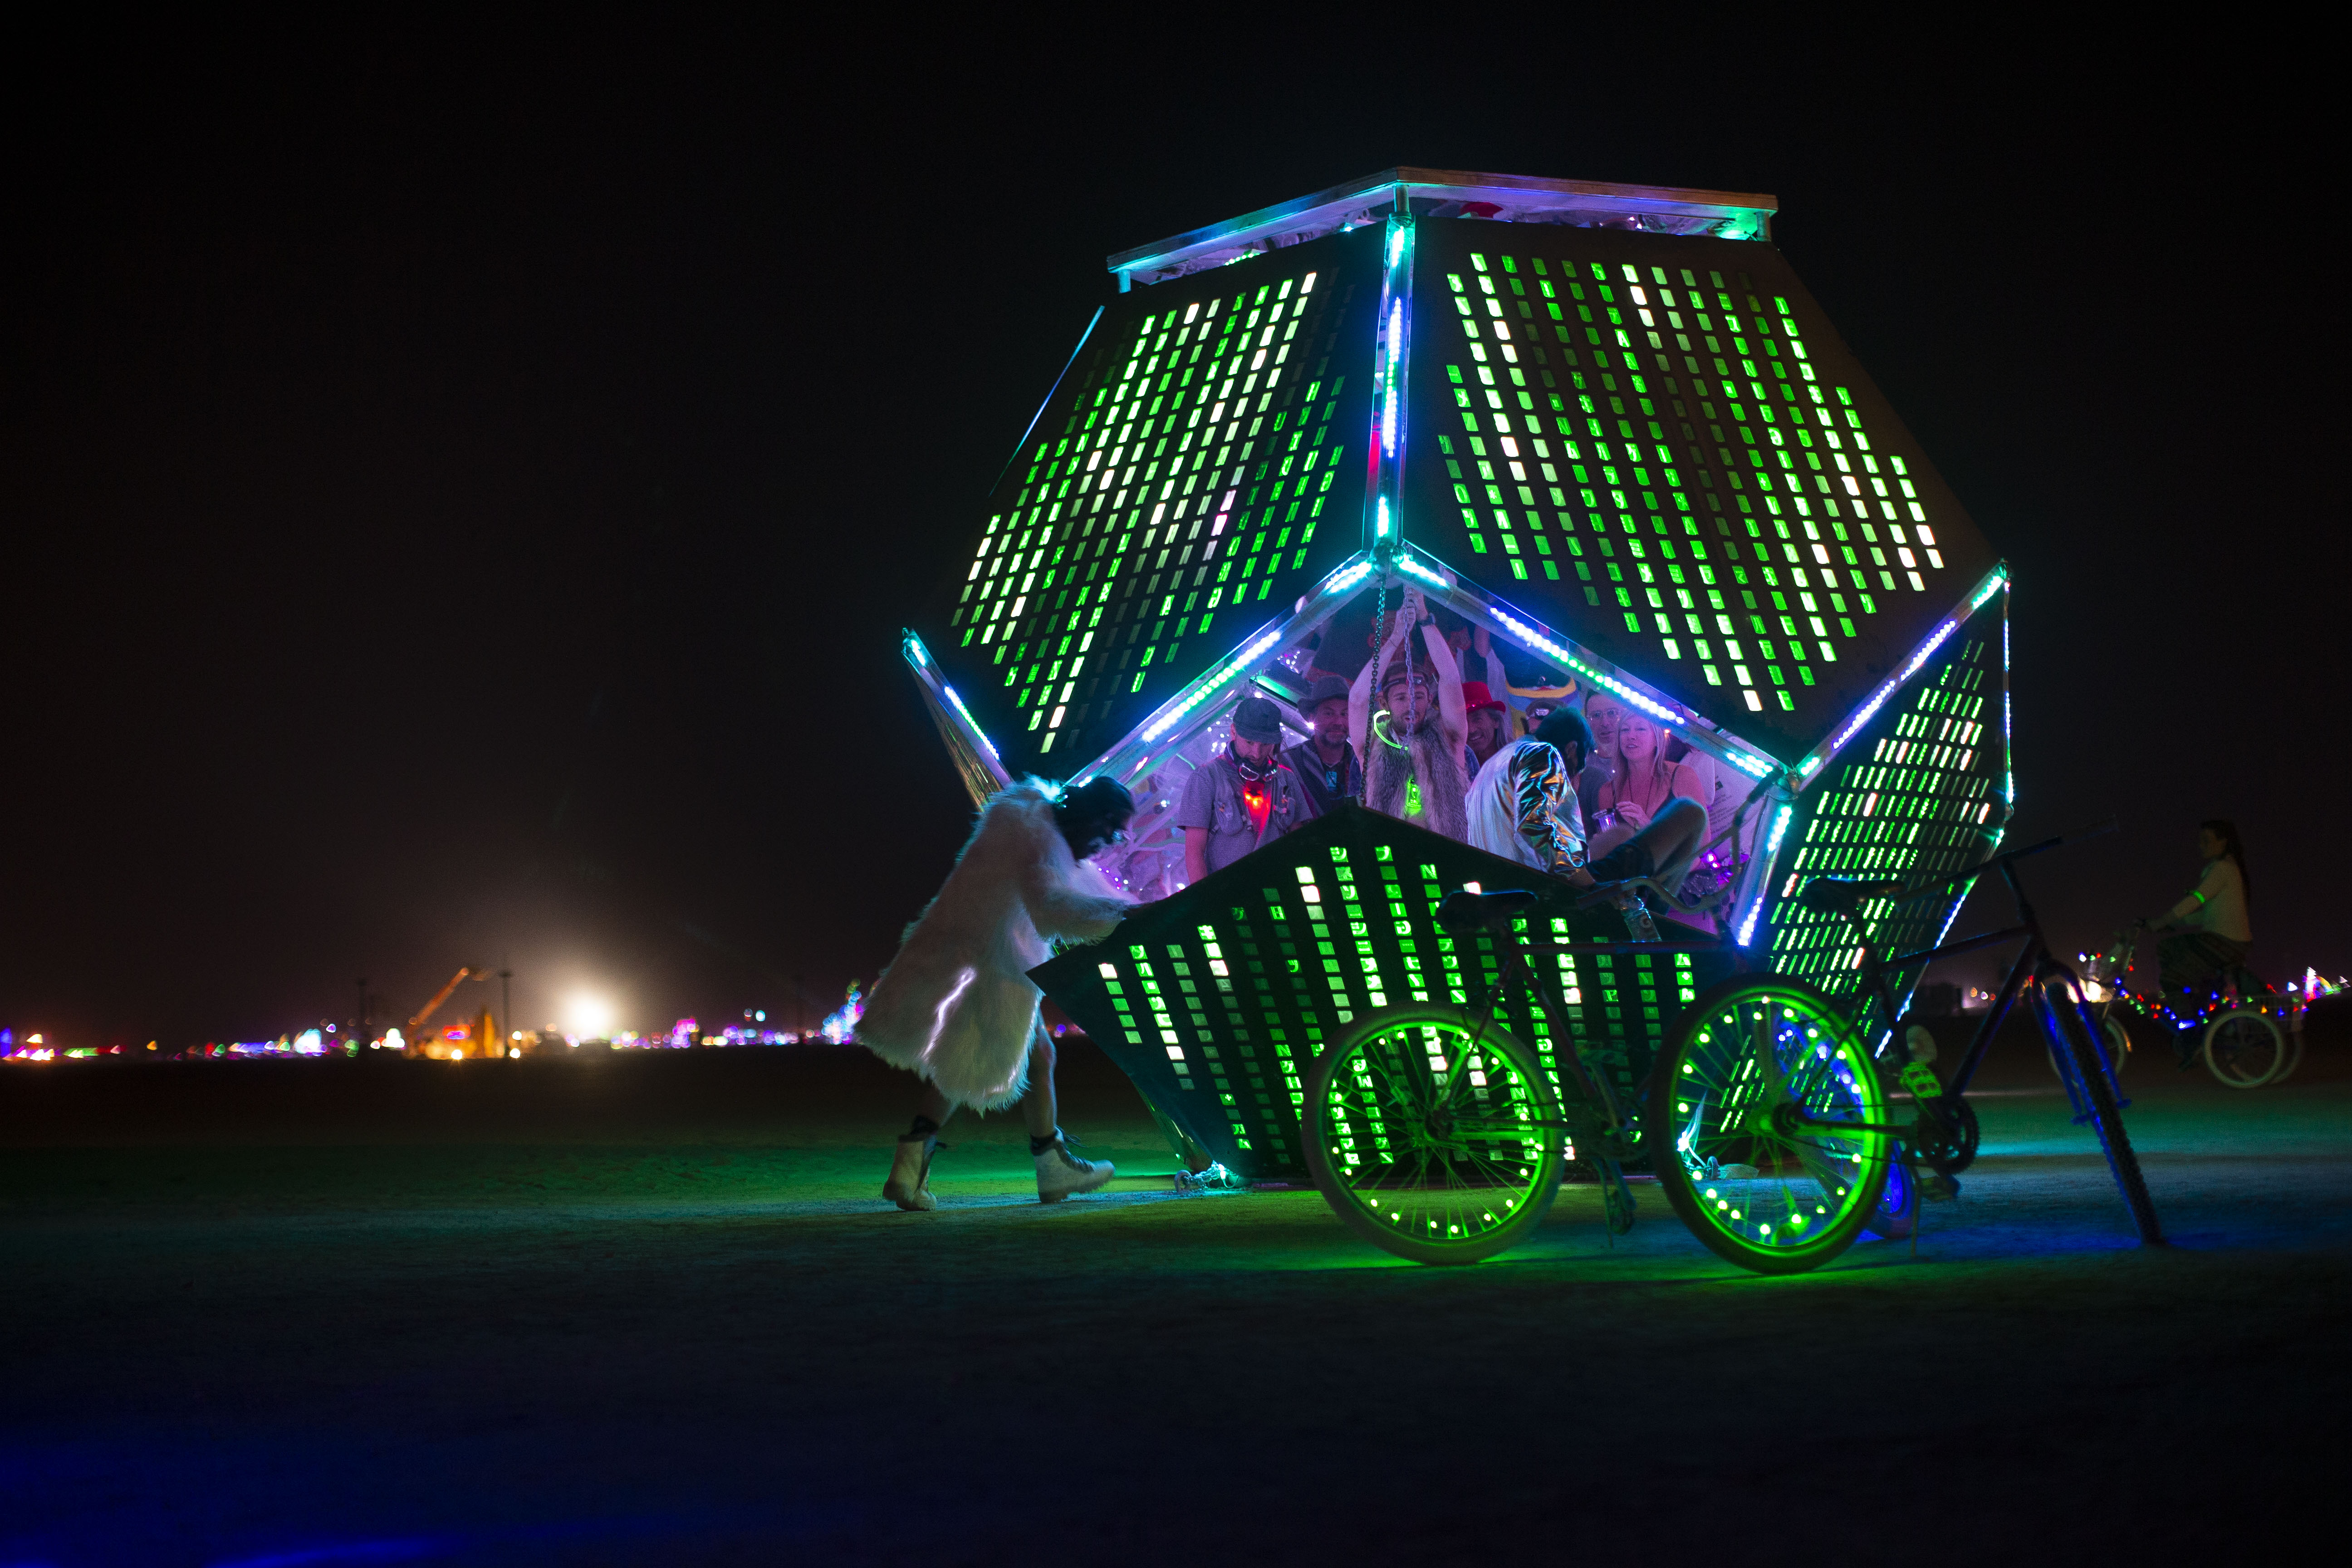 USD-based Artists Commissioned to Build Art for Burning Man